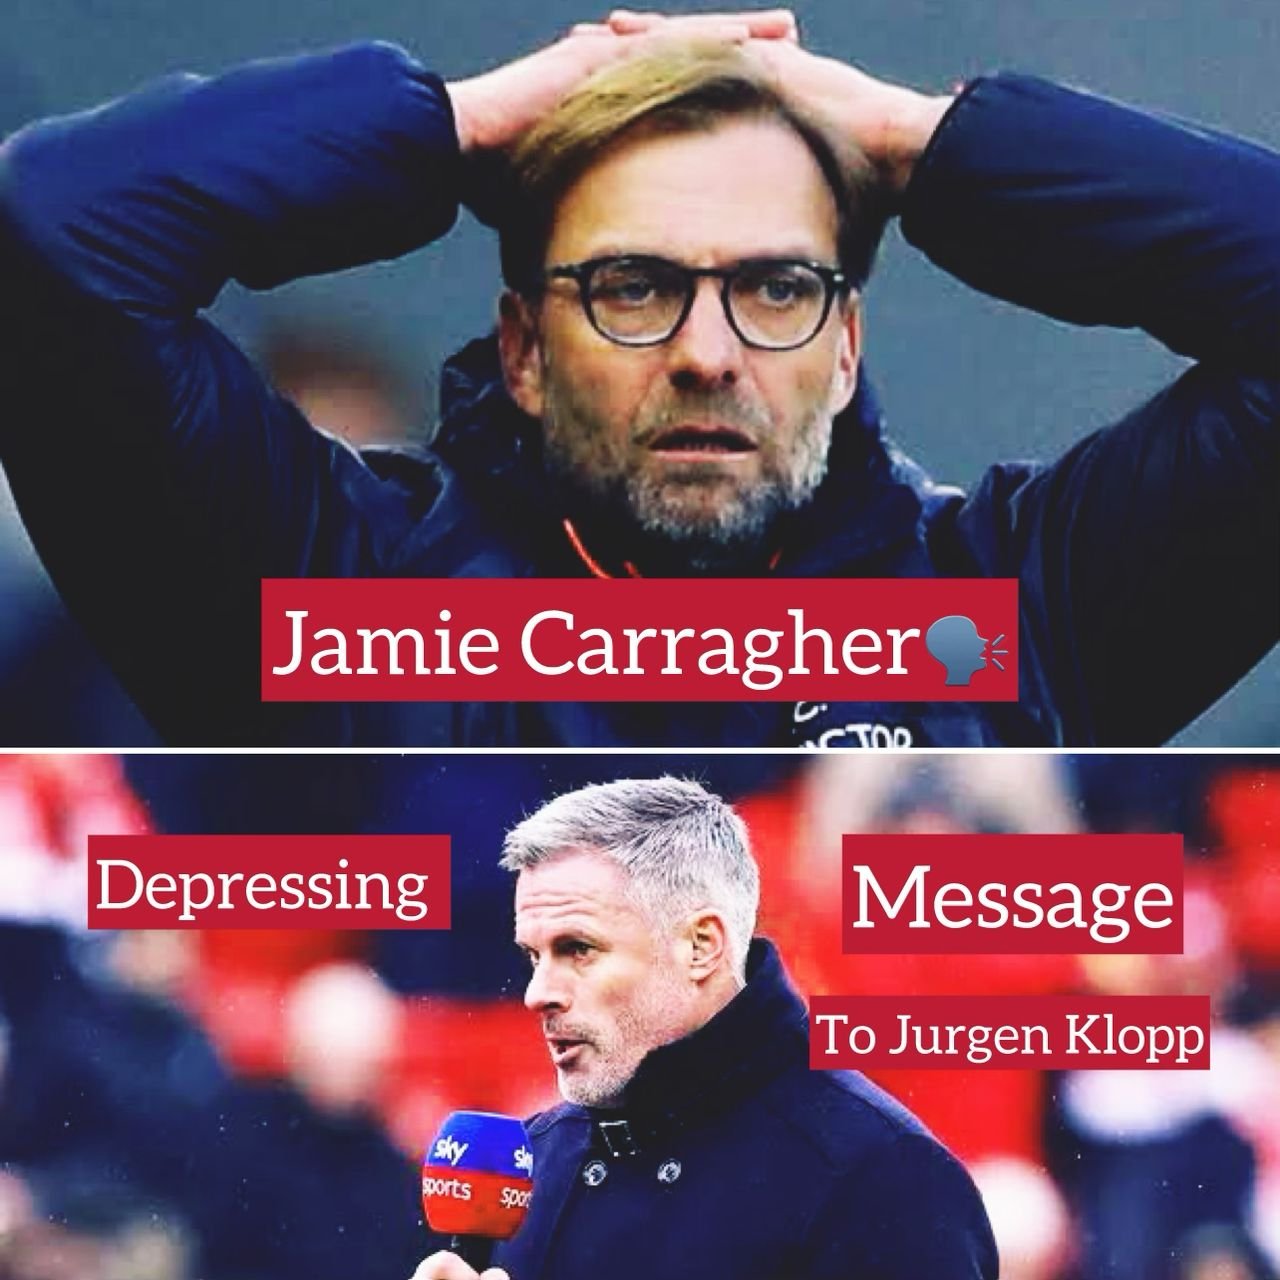 Jamie Carragher delivers a sad message to Liverpool head coach Jurgen Kloop and the team after their defeat by Man United in the FA CUP quarter final (4-3)